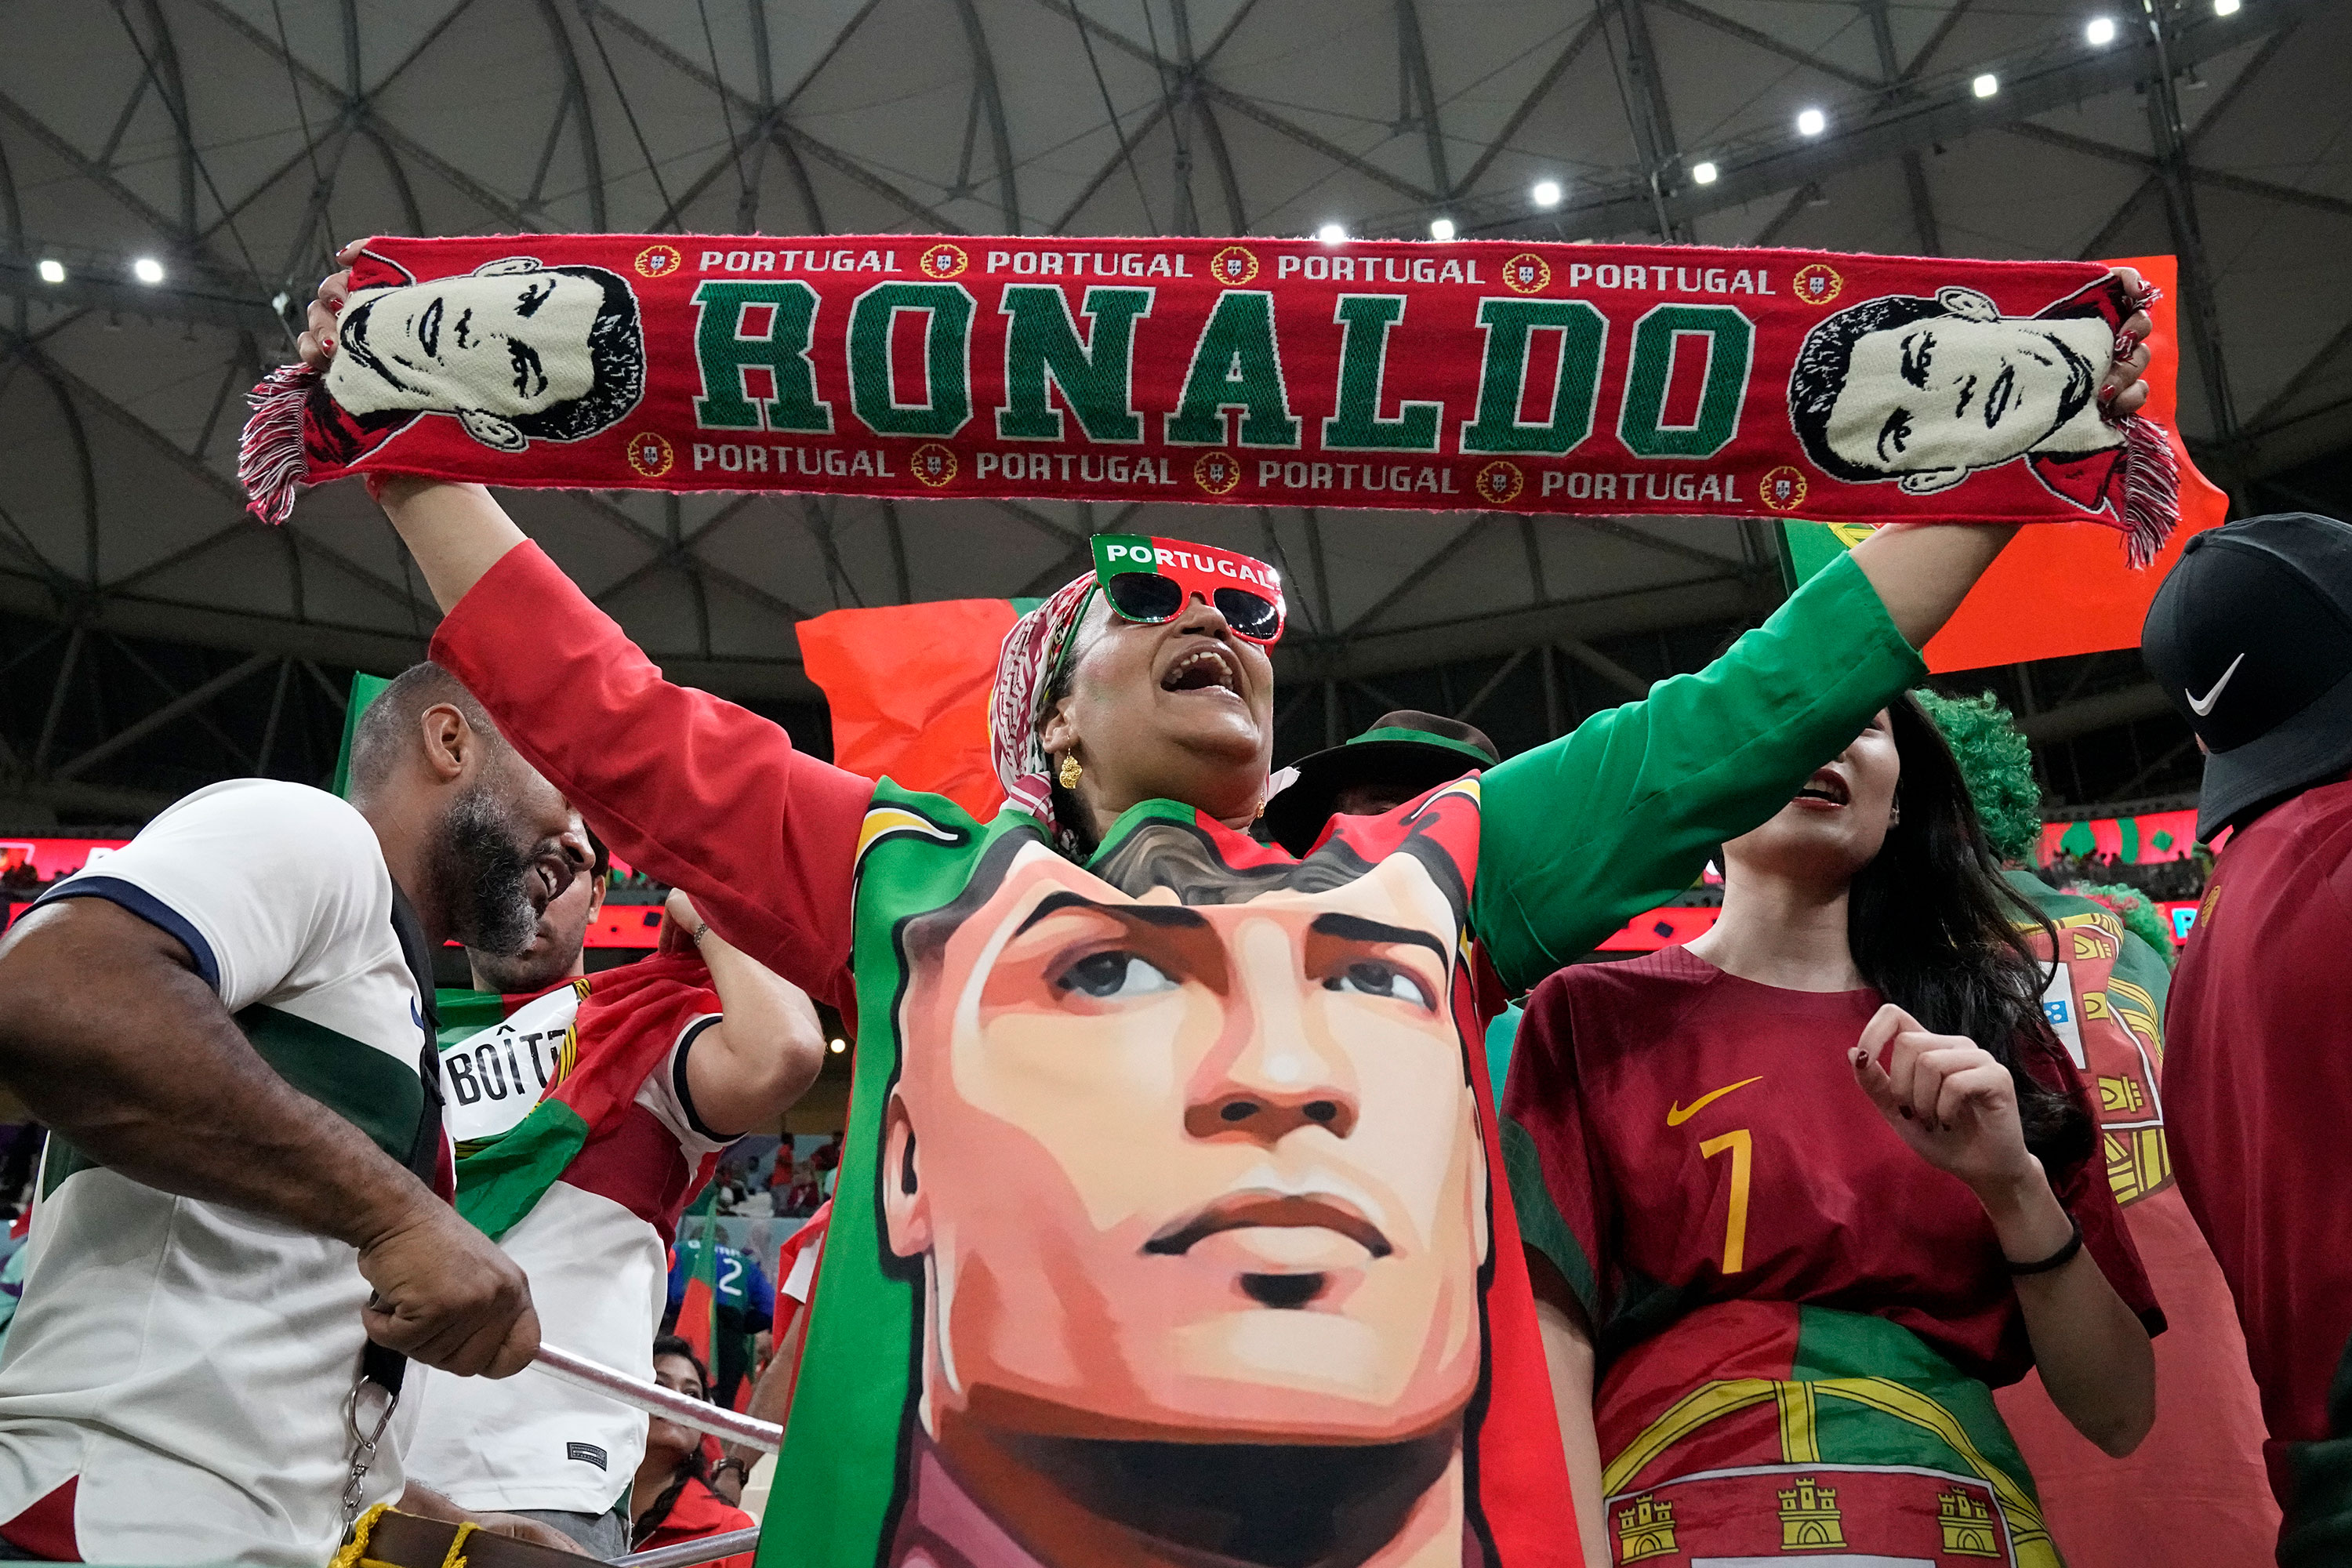 A Portugal fan cheers before the match between Portugal and Uruguay on Monday.